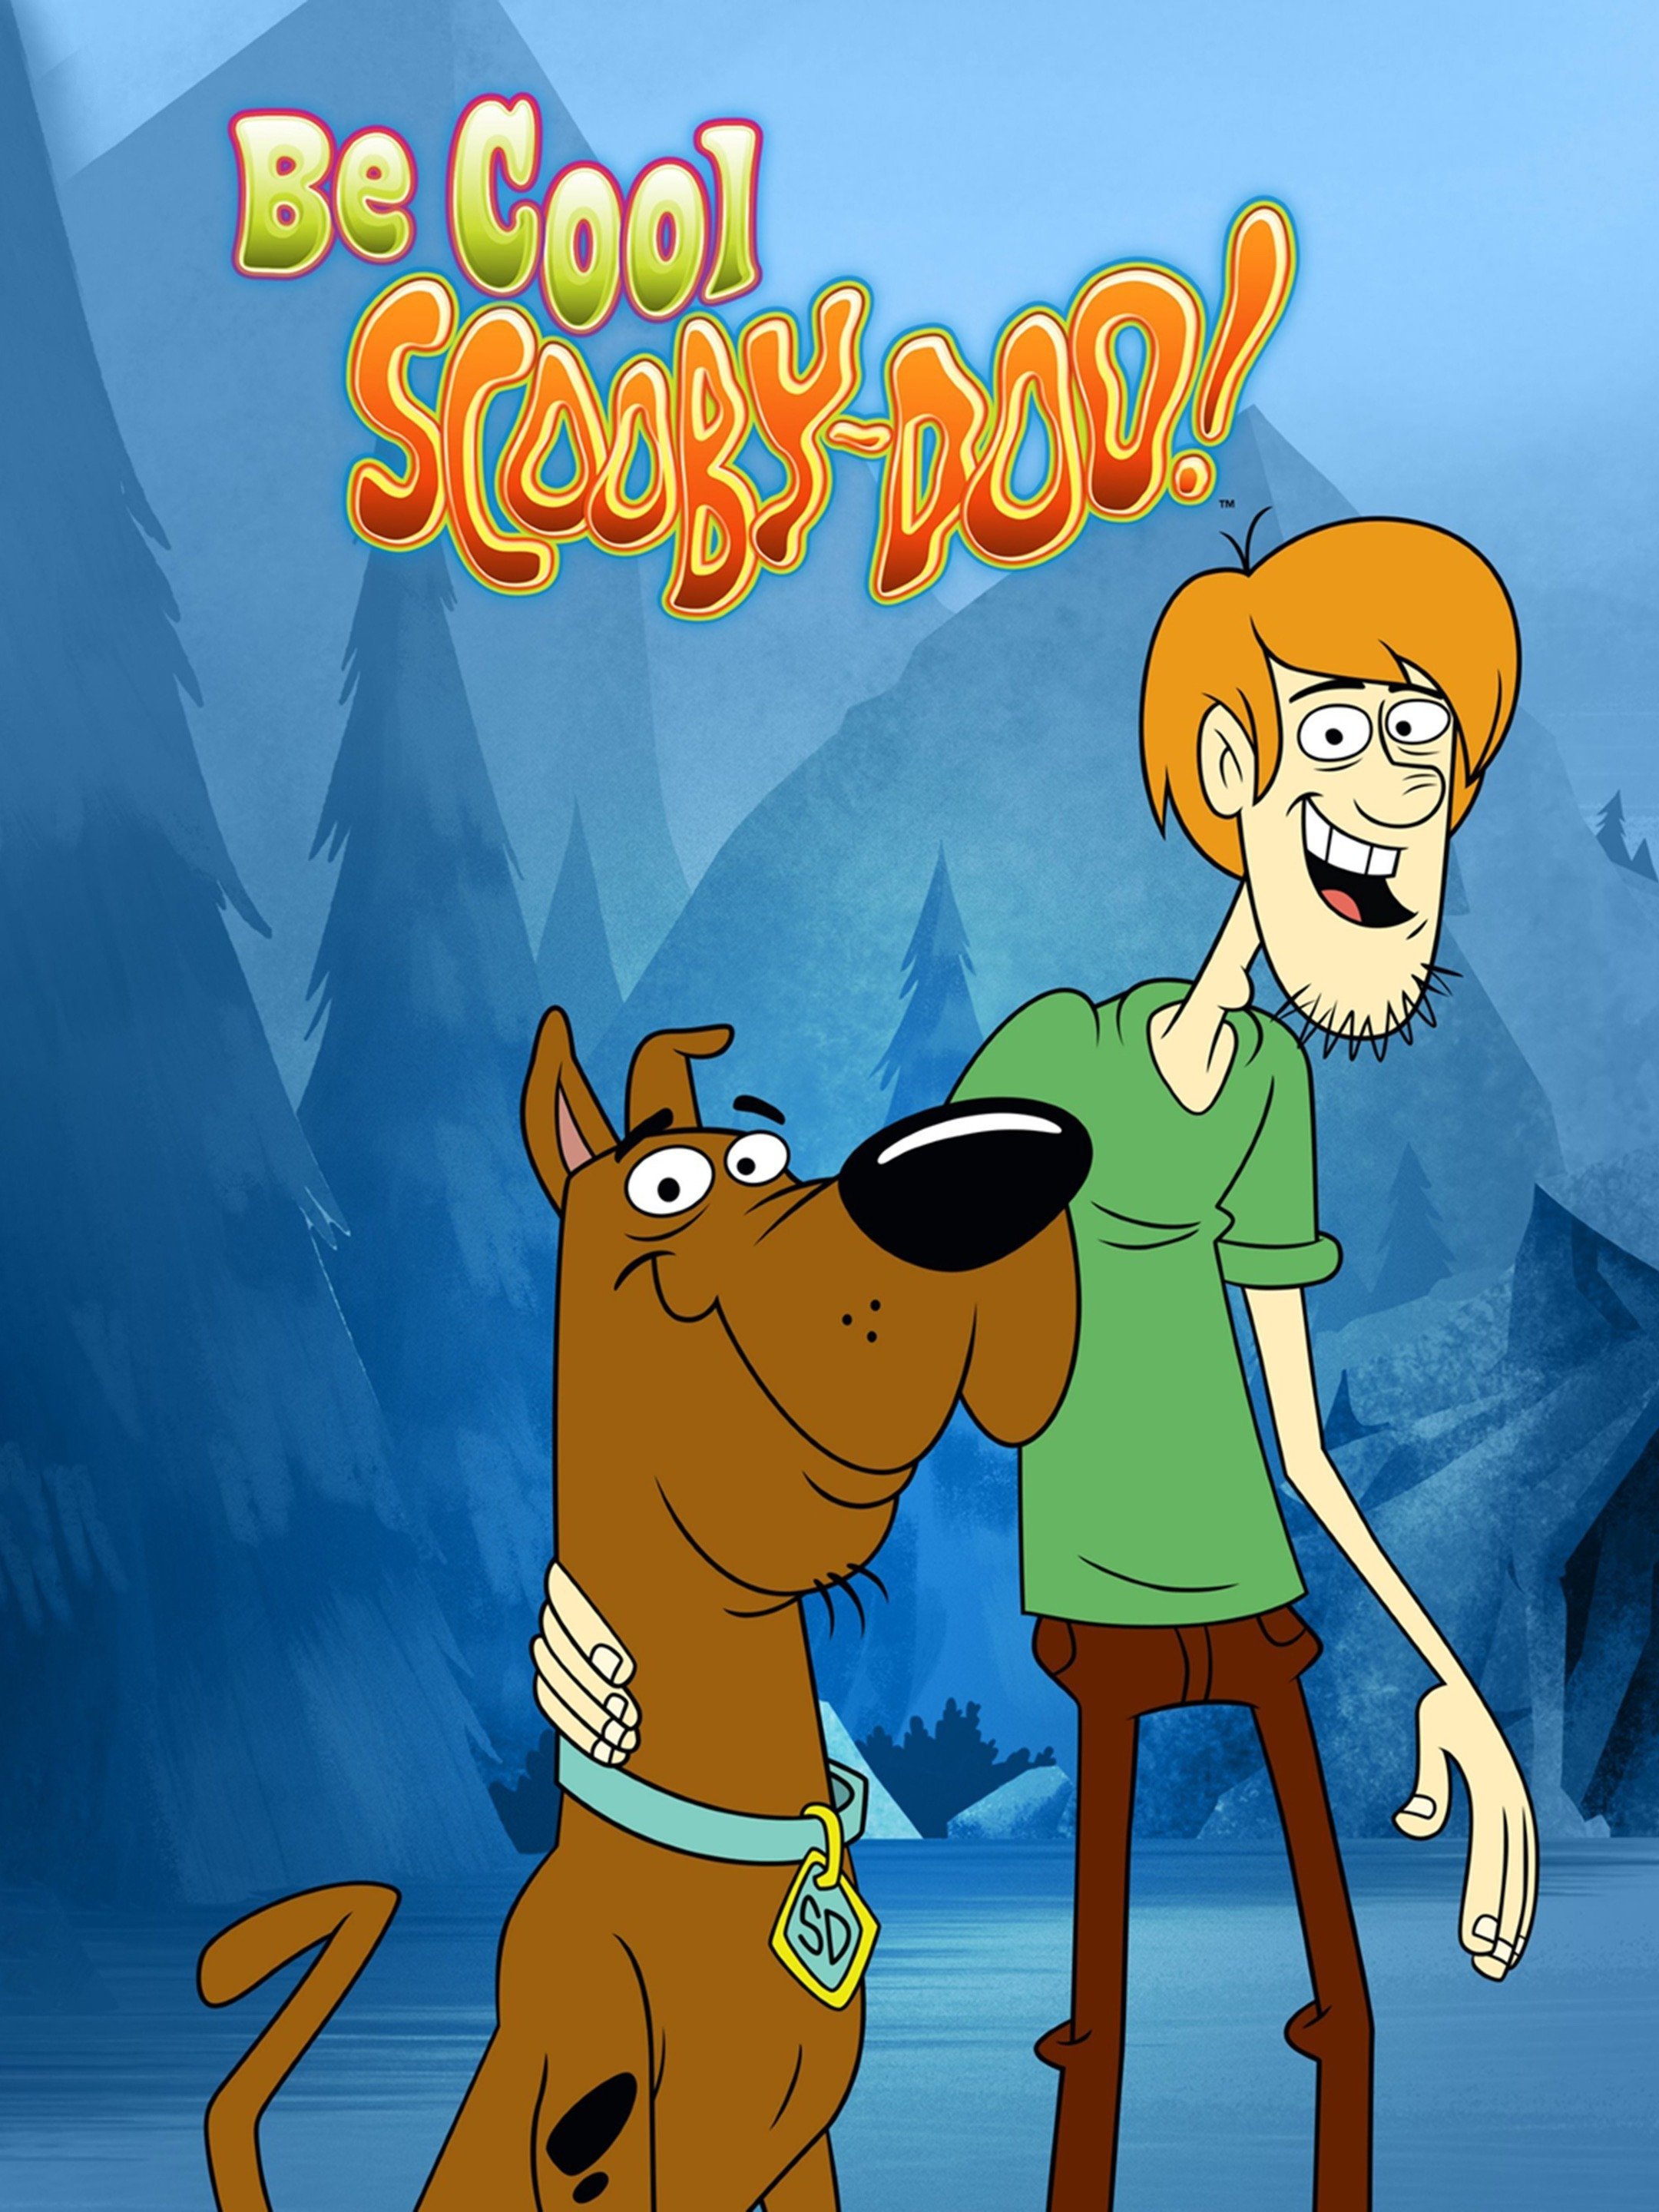 Be cool scooby doo reviews